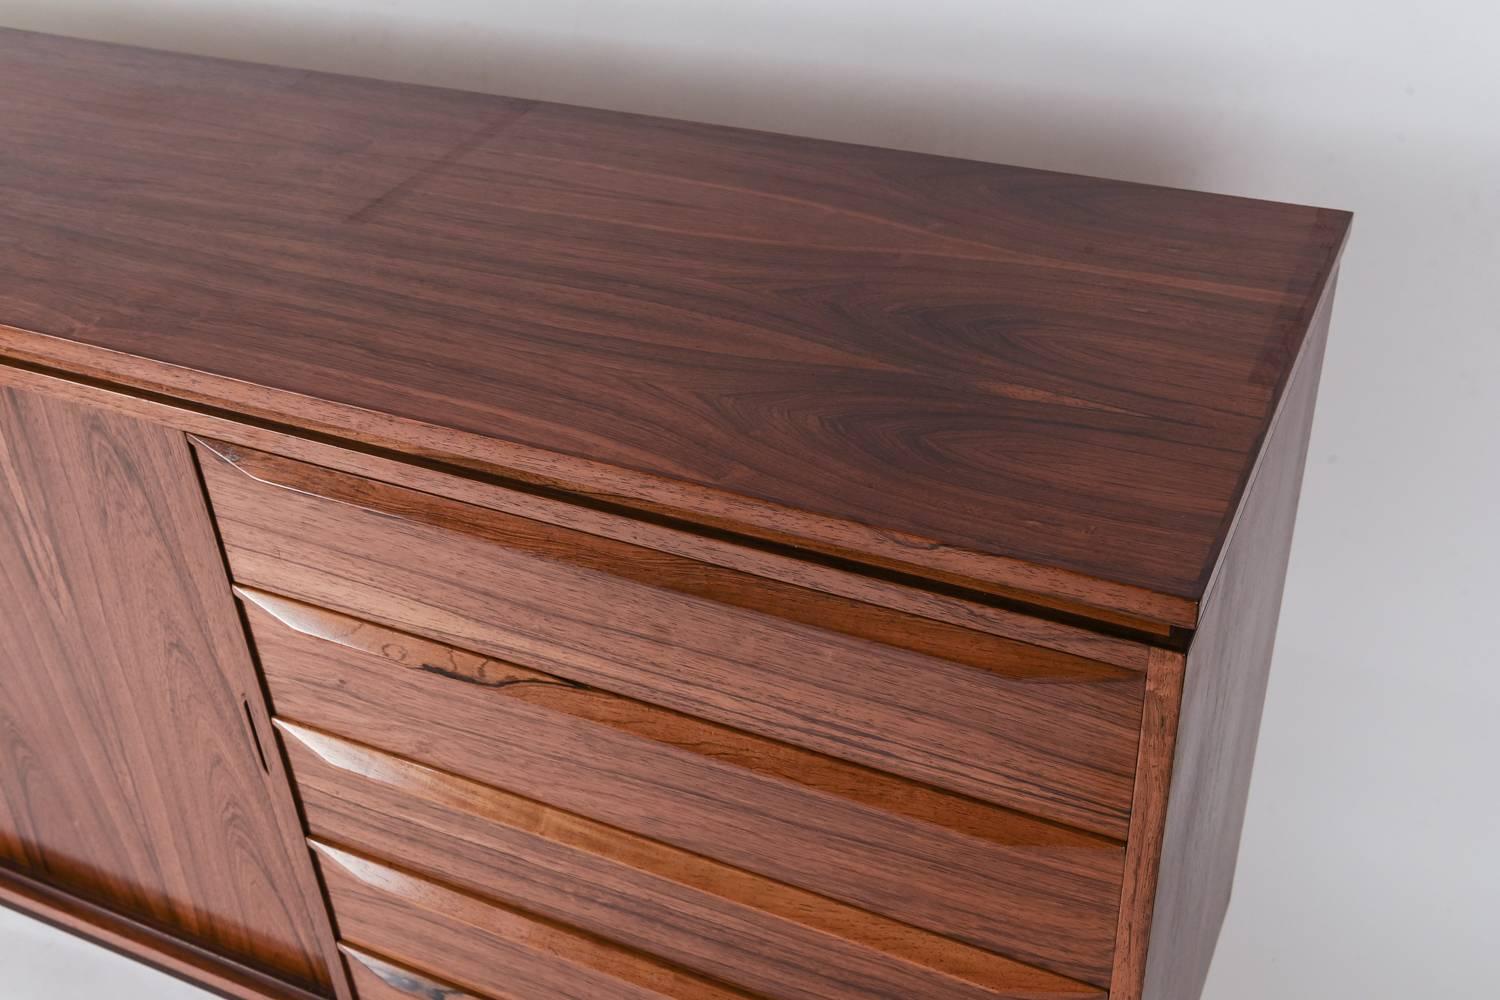 A beautiful piece in a stunning rosewood finish, this sideboard cabinet is ready brighten up any room!